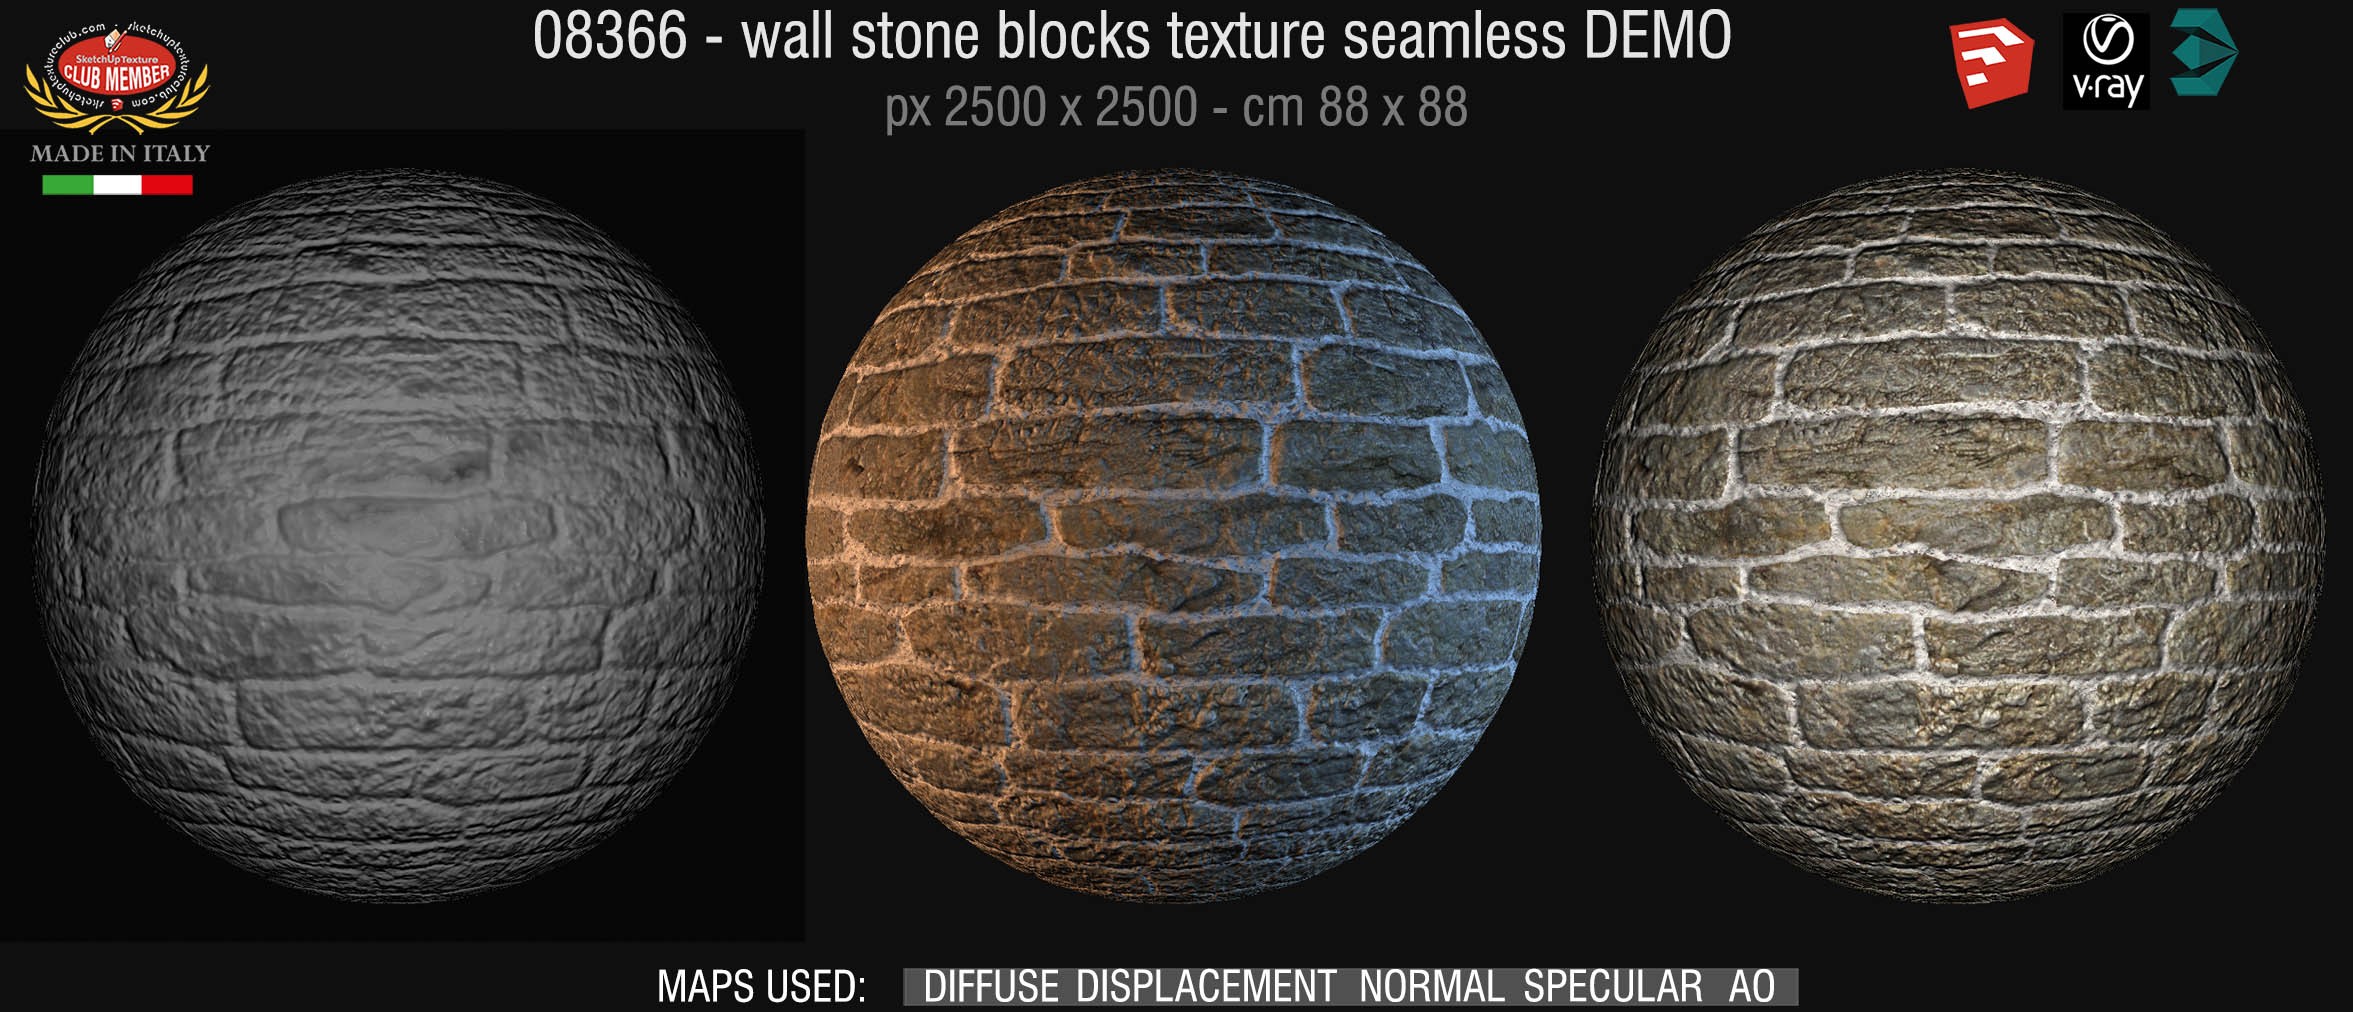 08366 HR Wall stone with regular blocks texture + maps DEMO